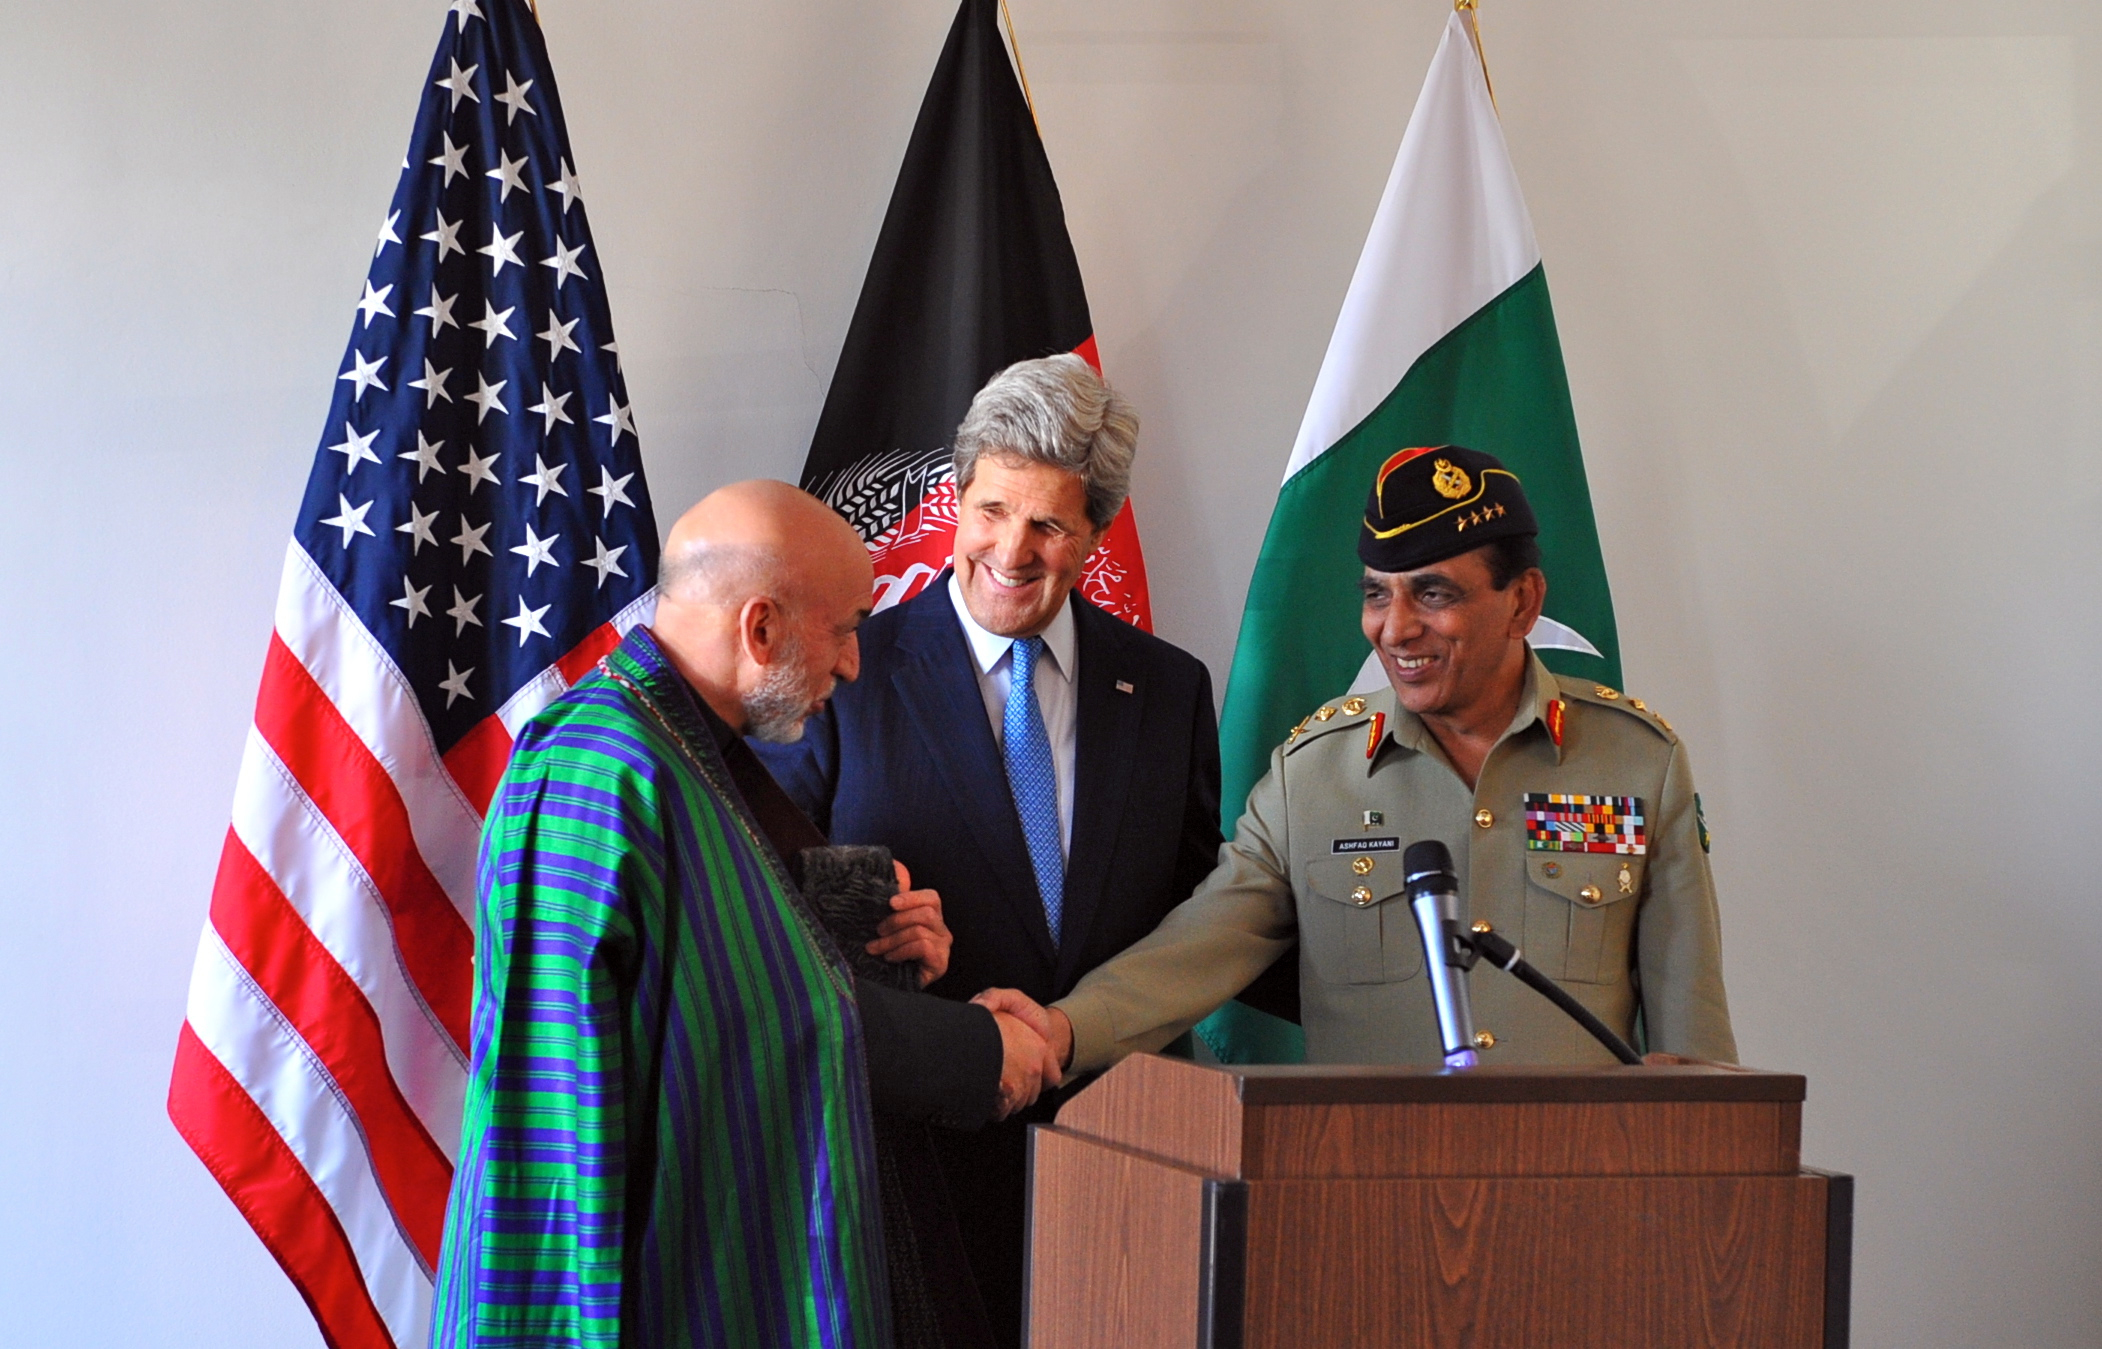 U.S. Secretary of State John Kerry looks on as Afghan President Hamid Karzai and Pakistani Chief of Army Staff General Ashfaq Kayani shake hands after their trilateral meeting in Brussels, Belgium, on April 24, 2013